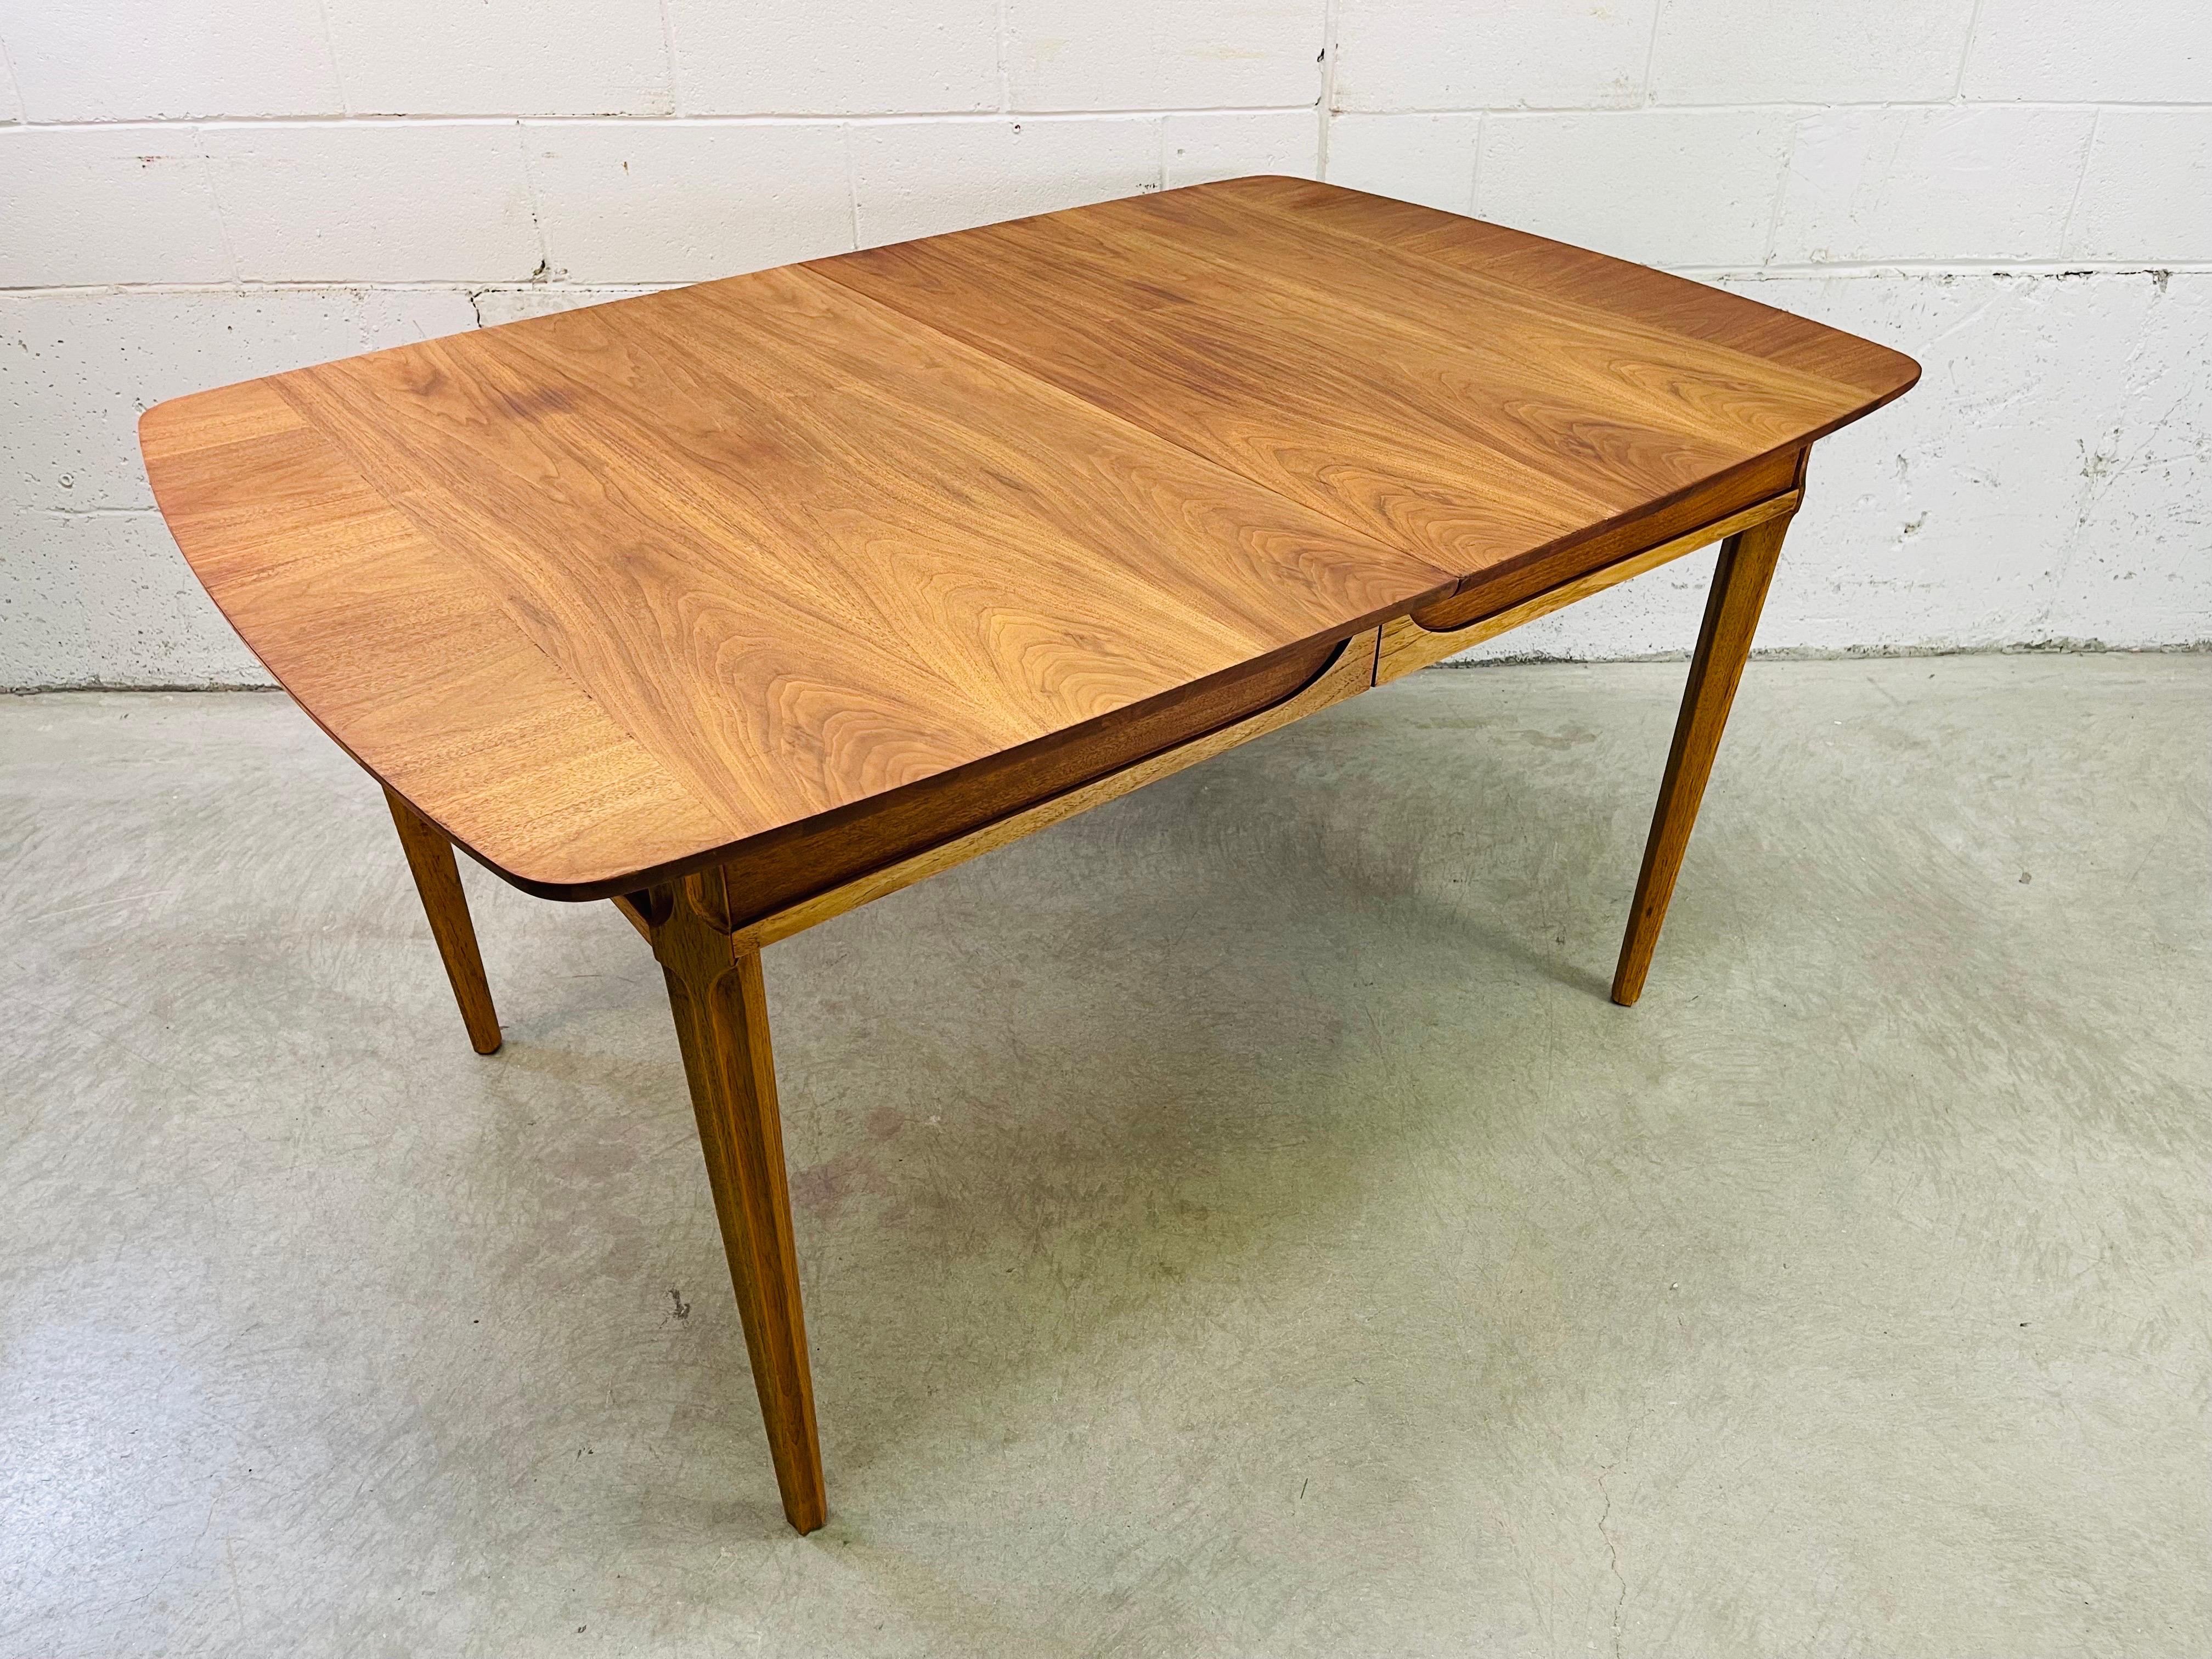 Vintage 1960s walnut wood dining table by Drexel Furniture in the Tempo line. The table has a beautiful walnut grain with tapered legs. No additional boards. Marked underneath.